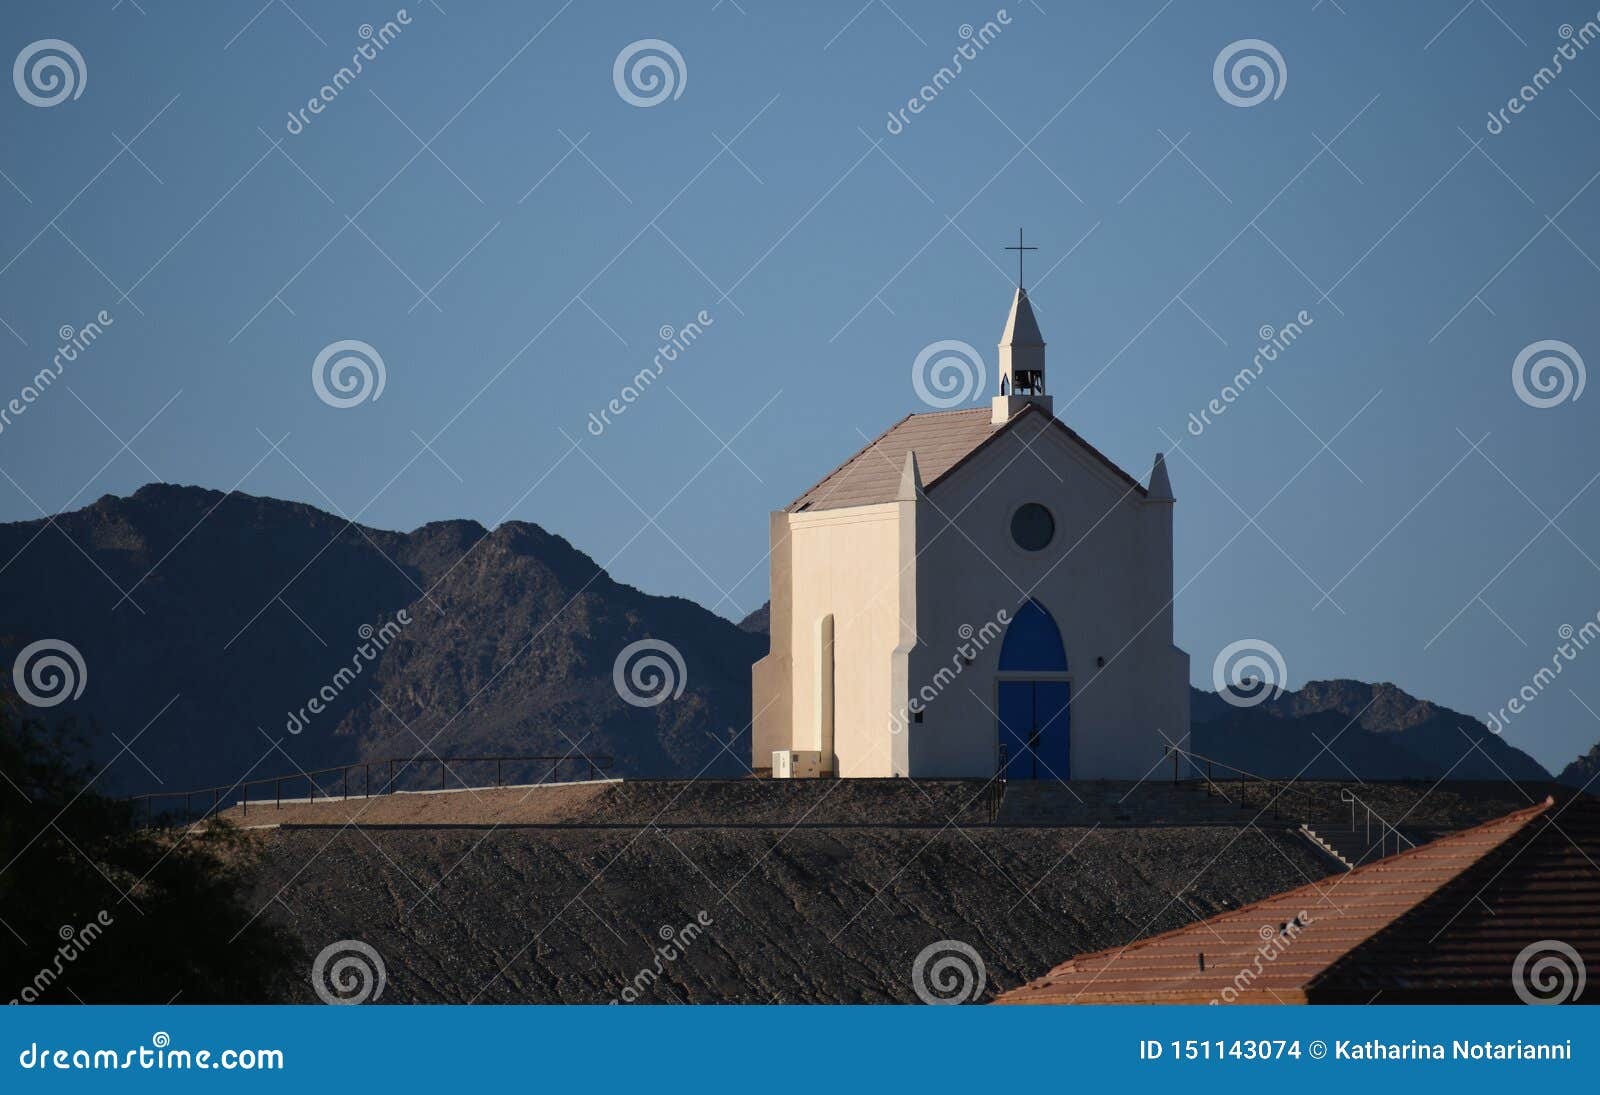 lone church on the hill in felicity